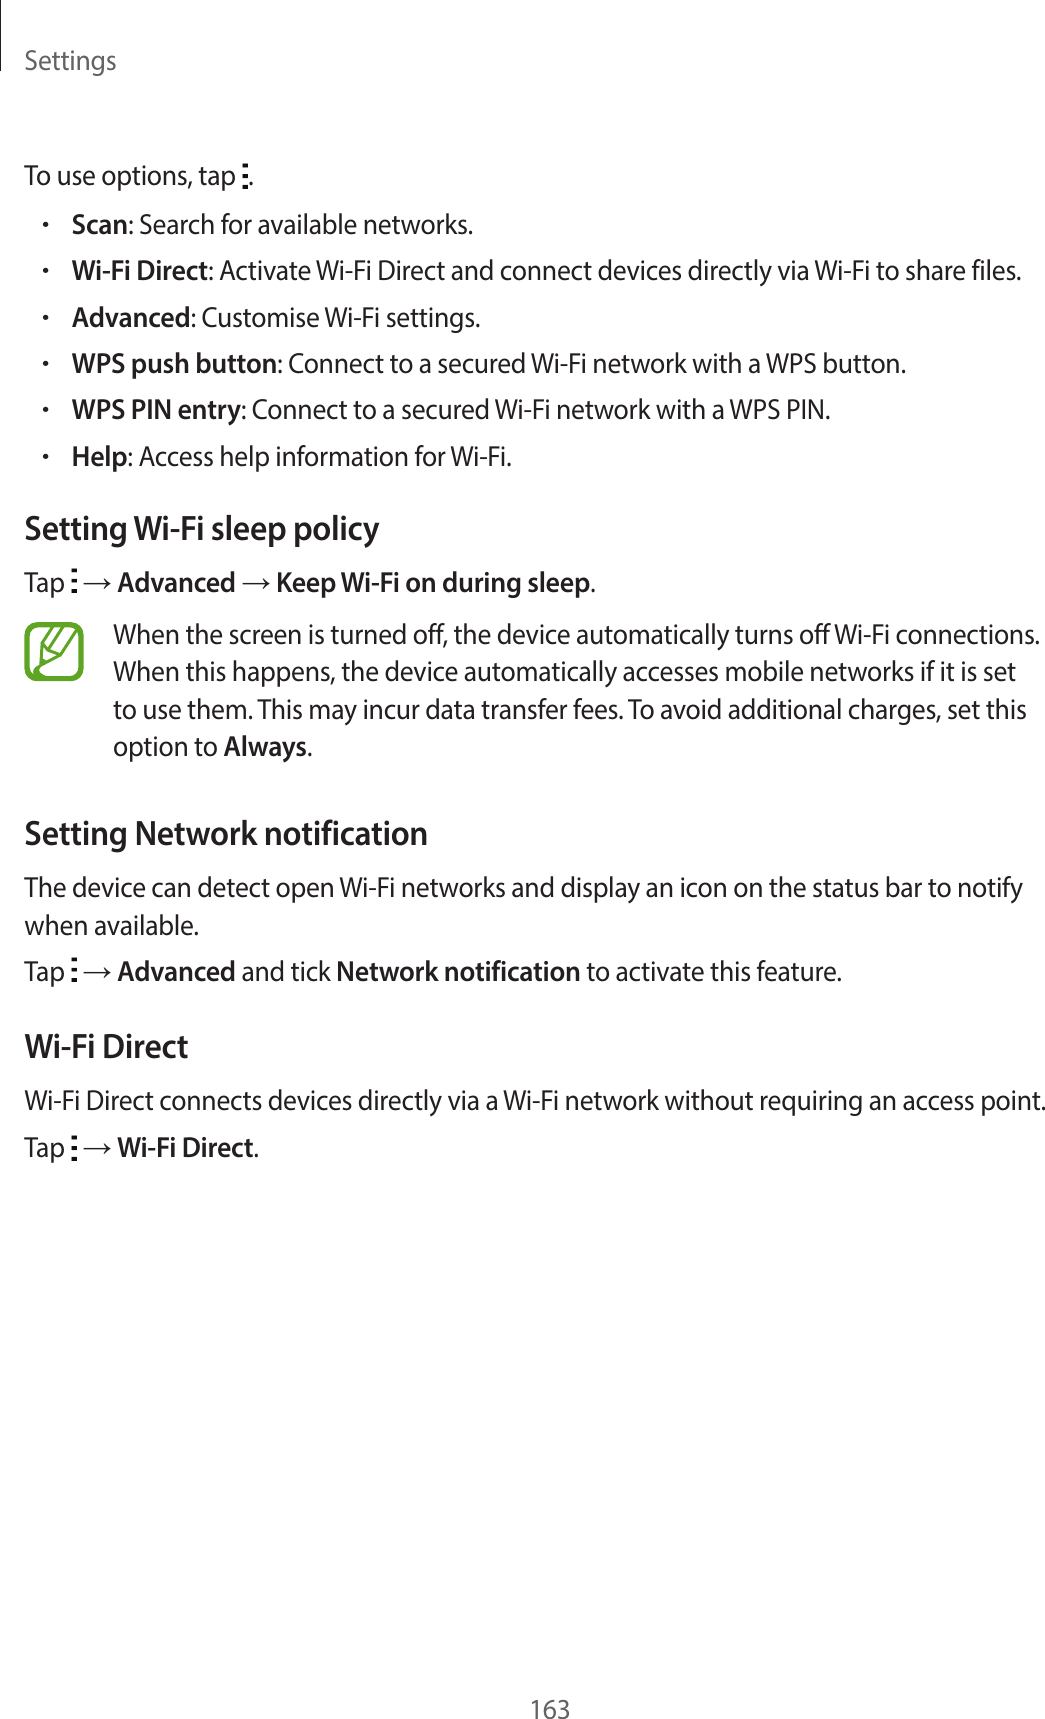 Settings163To use options, tap  .•Scan: Search for available networks.•Wi-Fi Direct: Activate Wi-Fi Direct and connect devices directly via Wi-Fi to share files.•Advanced: Customise Wi-Fi settings.•WPS push button: Connect to a secured Wi-Fi network with a WPS button.•WPS PIN entry: Connect to a secured Wi-Fi network with a WPS PIN.•Help: Access help information for Wi-Fi.Setting Wi-Fi sleep policyTap   → Advanced → Keep Wi-Fi on during sleep.When the screen is turned off, the device automatically turns off Wi-Fi connections. When this happens, the device automatically accesses mobile networks if it is set to use them. This may incur data transfer fees. To avoid additional charges, set this option to Always.Setting Network notificationThe device can detect open Wi-Fi networks and display an icon on the status bar to notify when available.Tap   → Advanced and tick Network notification to activate this feature.Wi-Fi DirectWi-Fi Direct connects devices directly via a Wi-Fi network without requiring an access point.Tap   → Wi-Fi Direct.